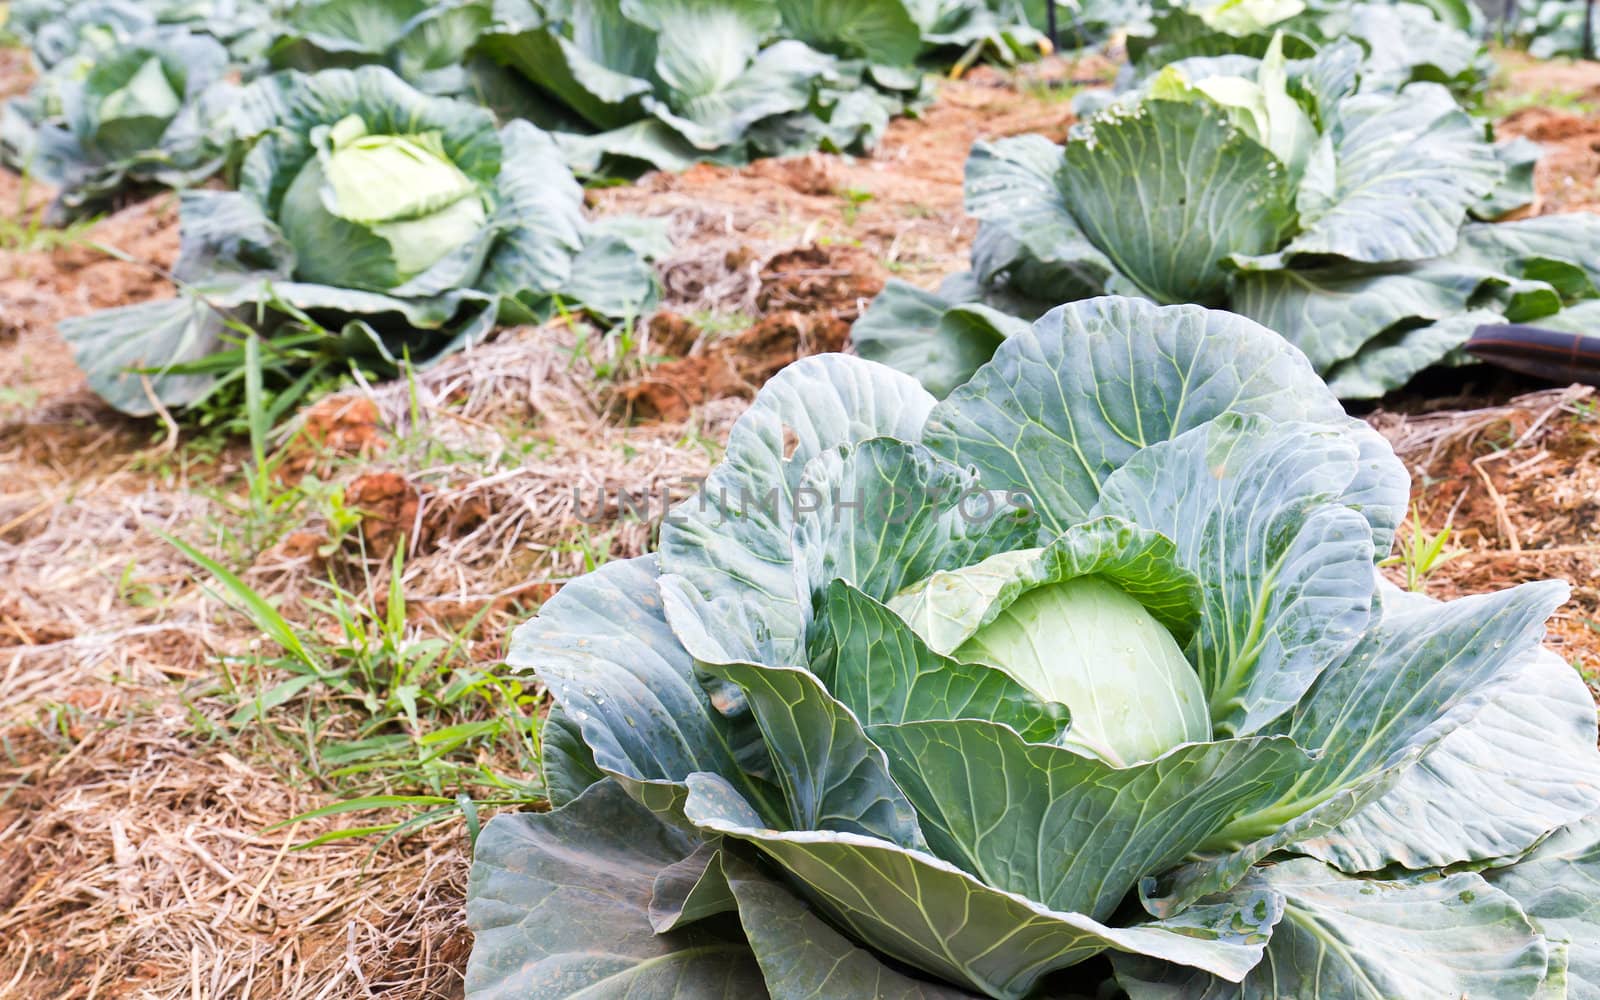 Cabbage fields in Thailand, rows of vegetable food